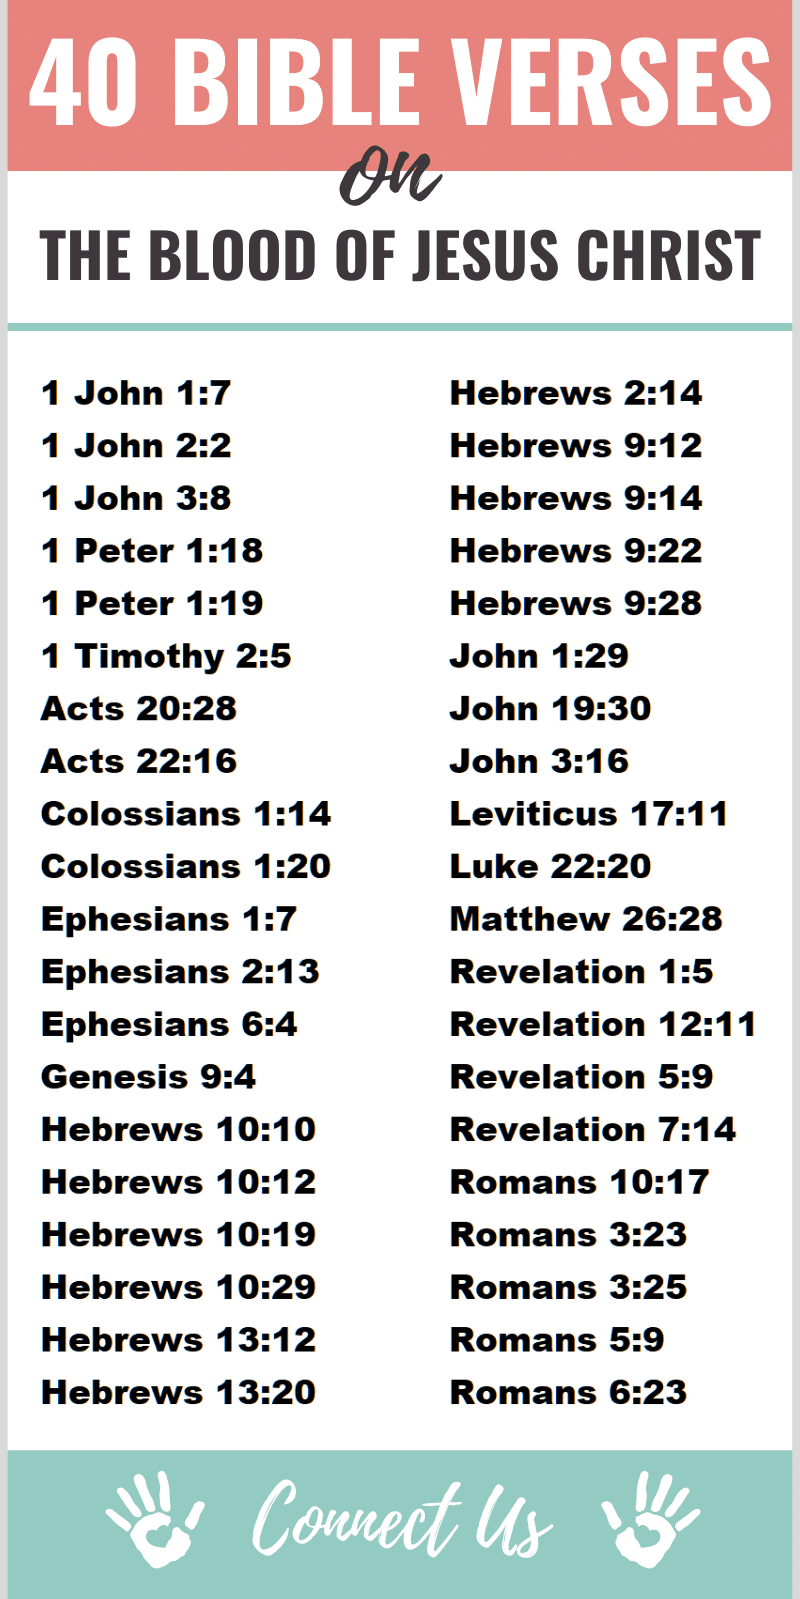 Bible Verses on the Blood of Jesus Christ